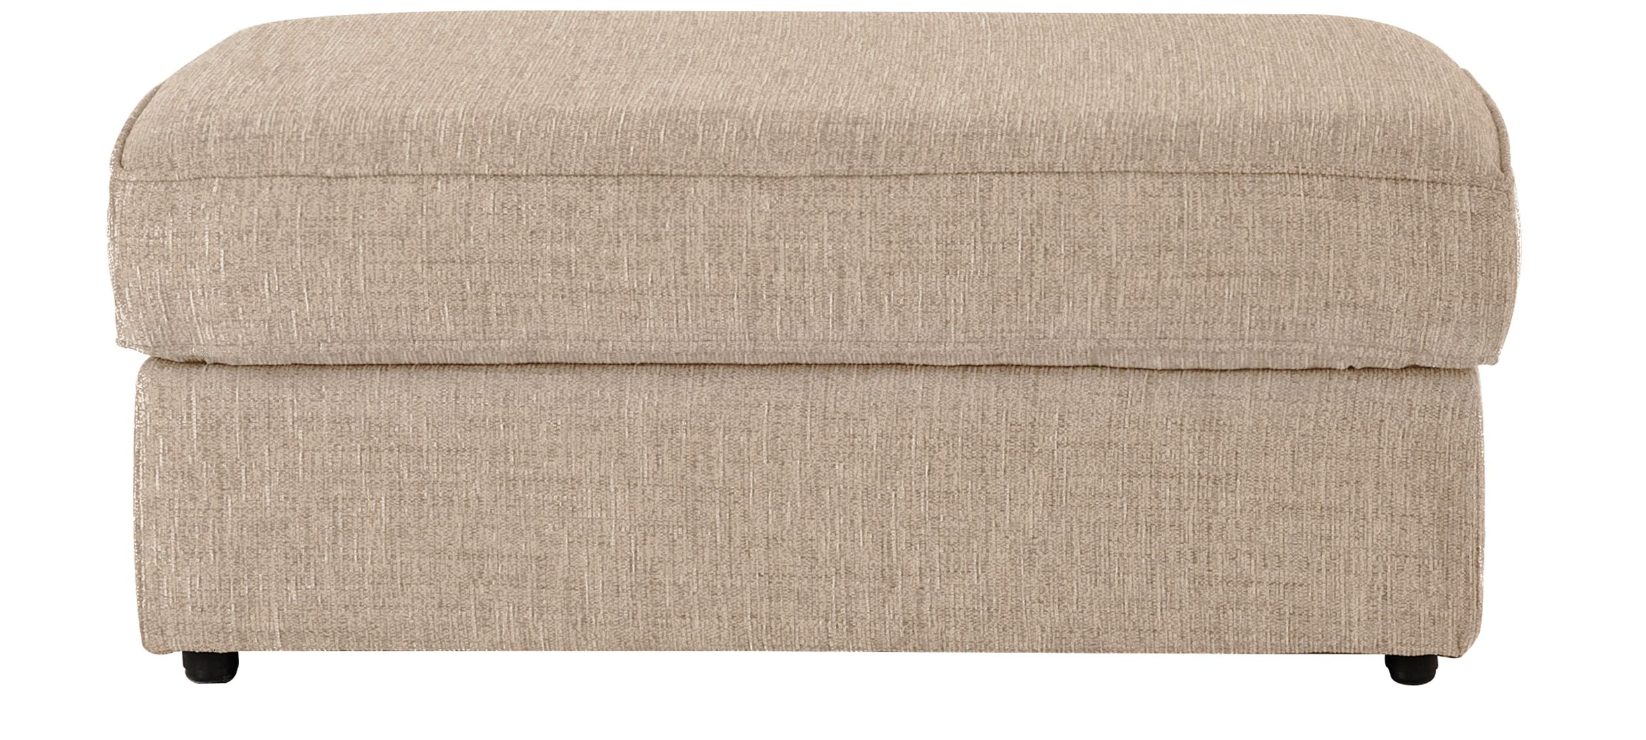 Ashleigh Banquette Footstool Footstools- KC Sofas